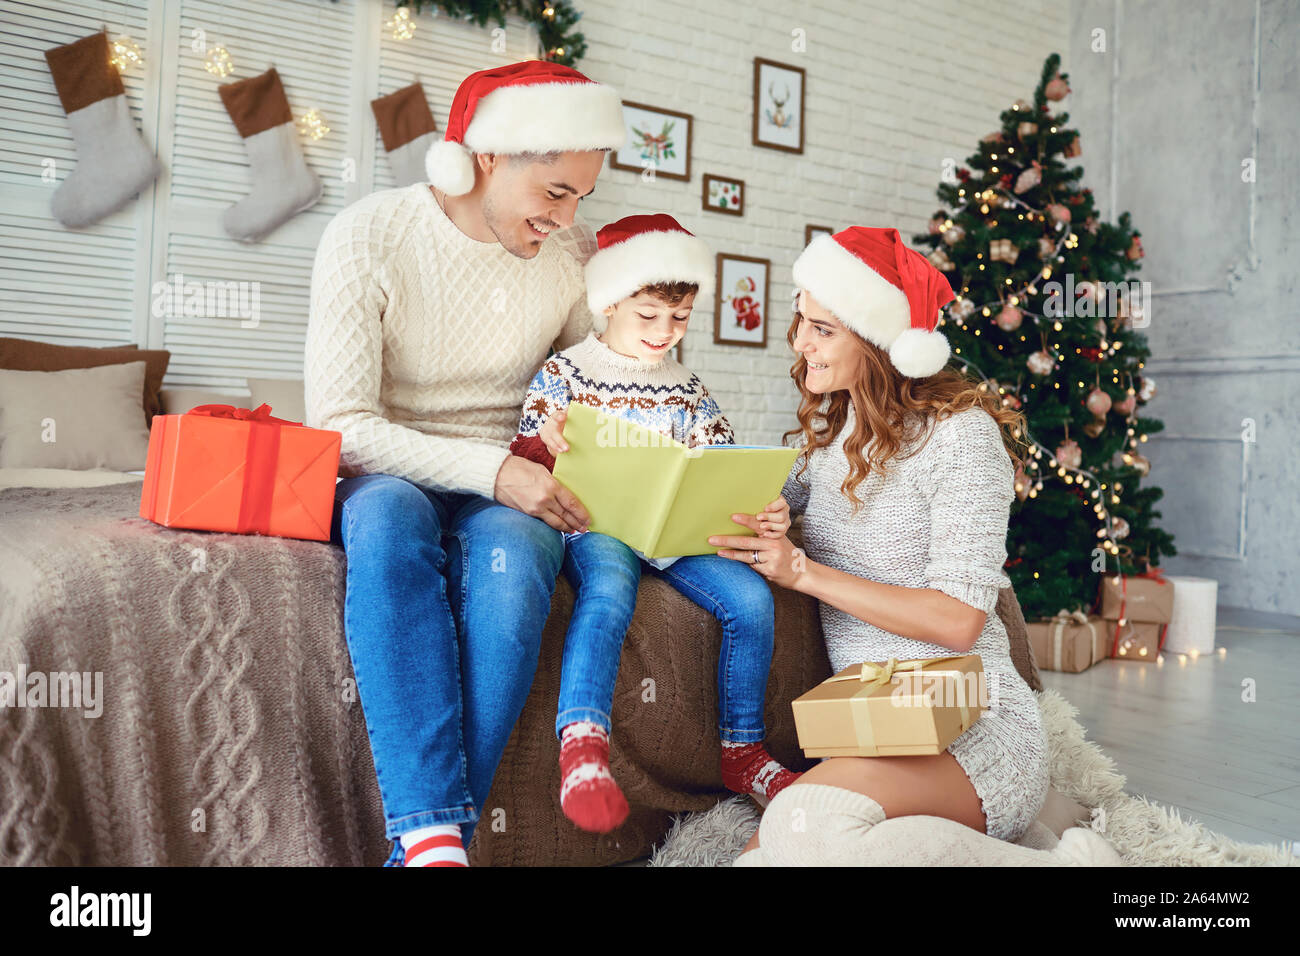 Family reading a bookin a house with a Christmas tree. Stock Photo